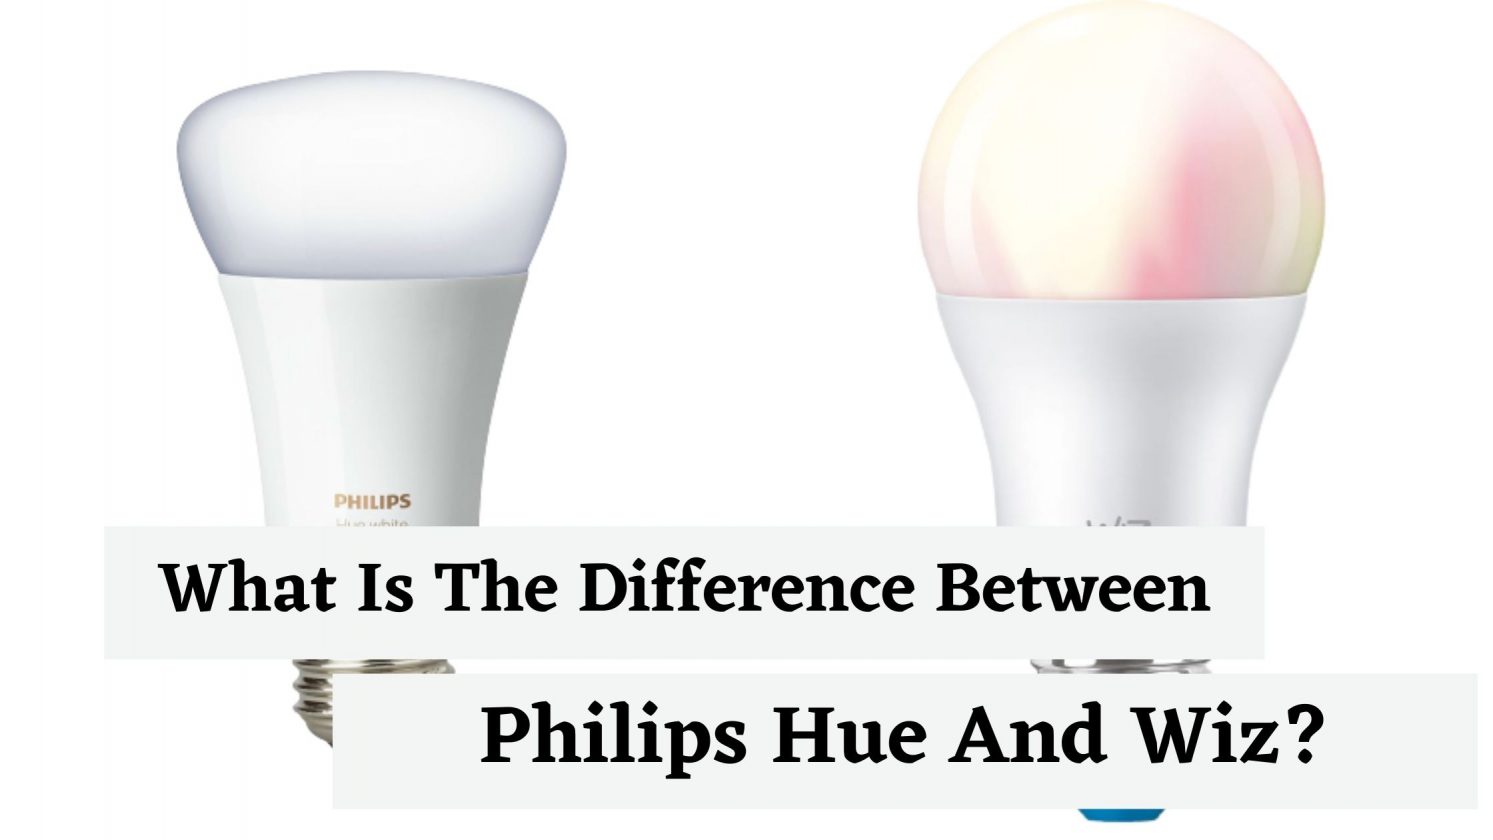 the difference between philips hue and wiz